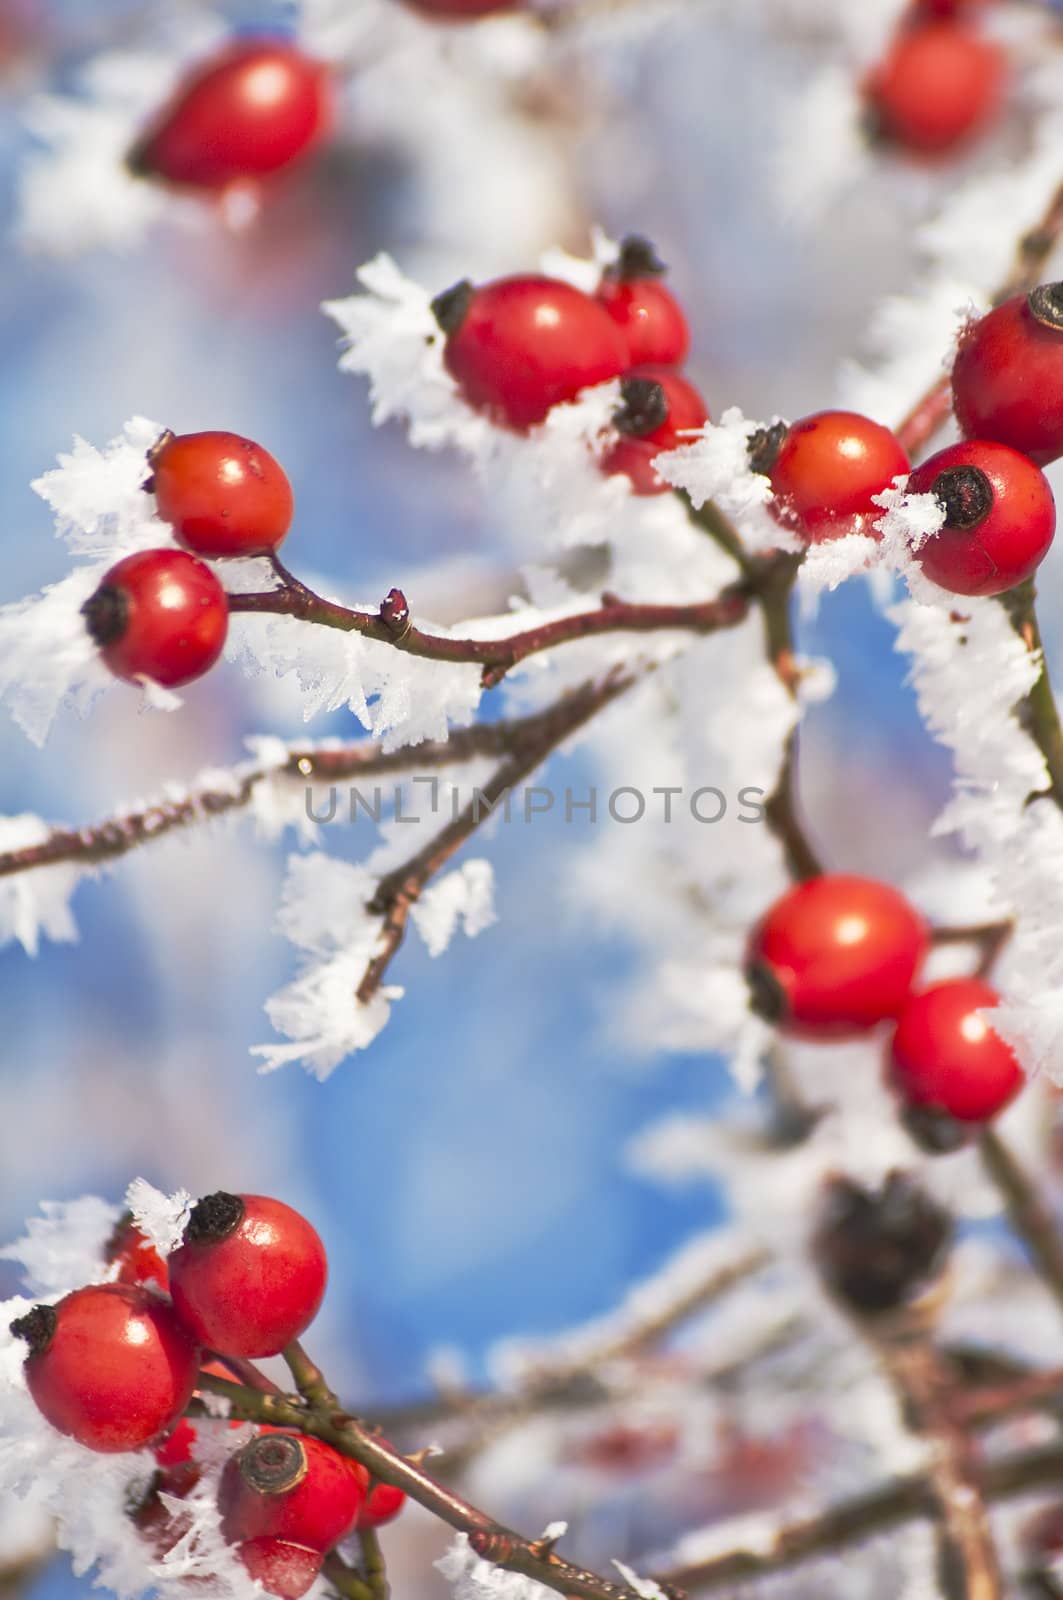 rose hip with ice crystals by Jochen